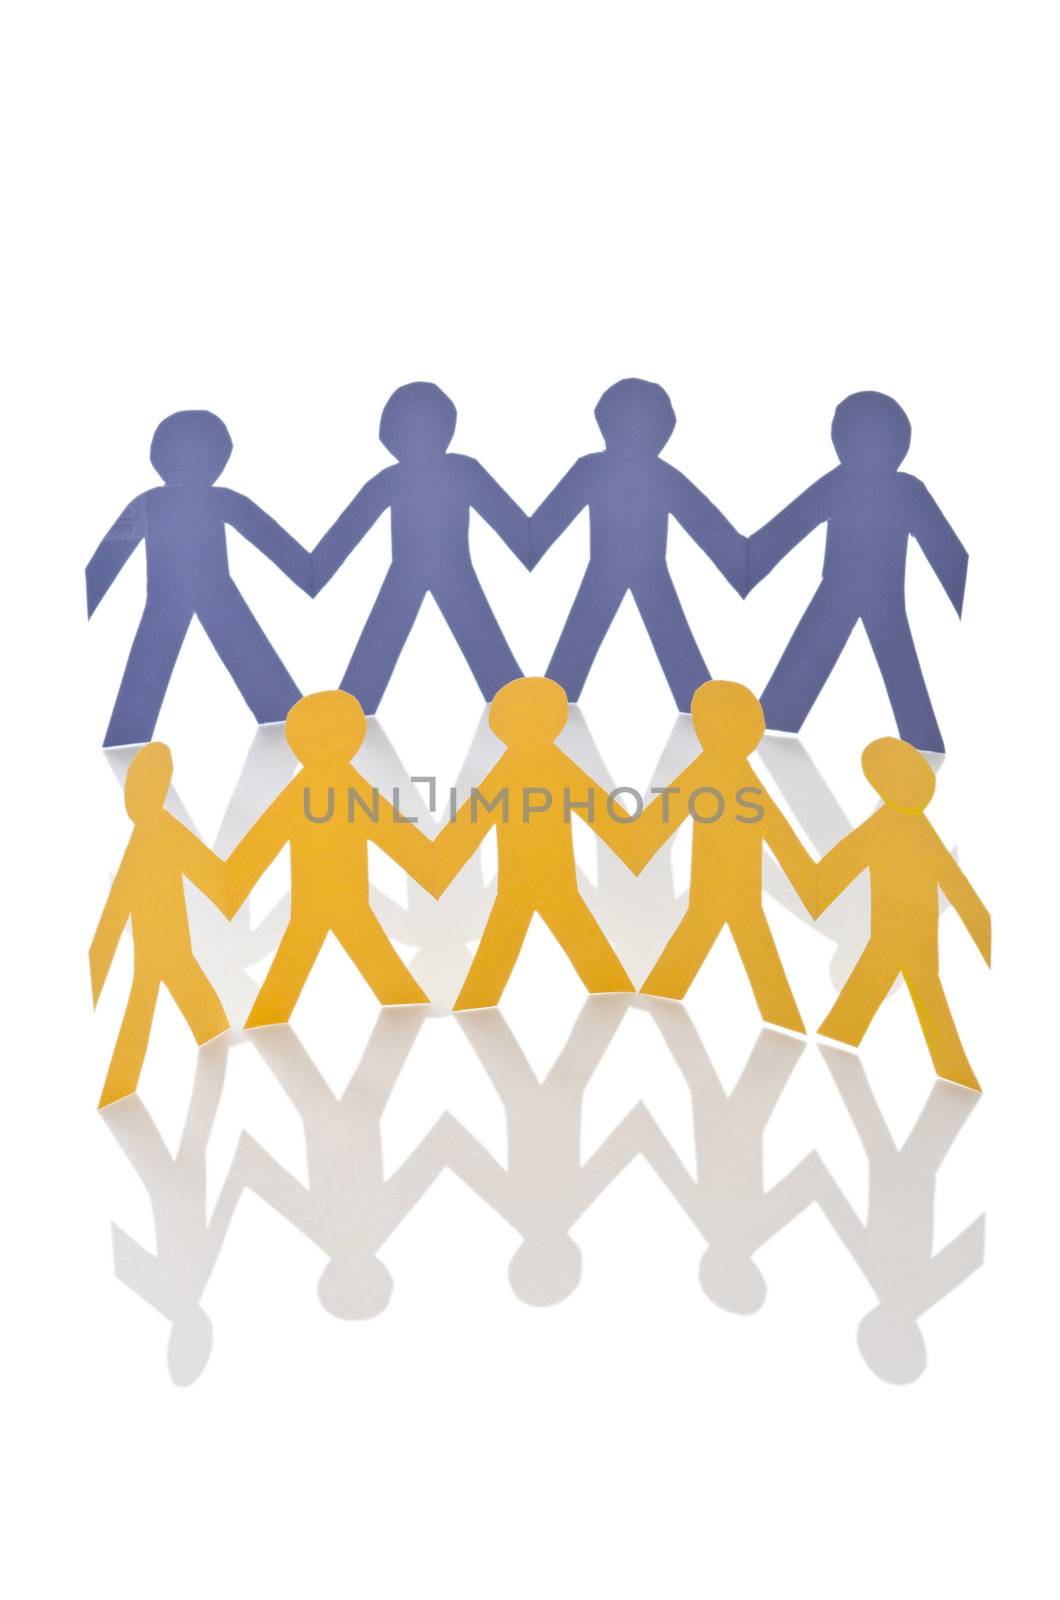 Teamwork concept with paper cut people by Elnur